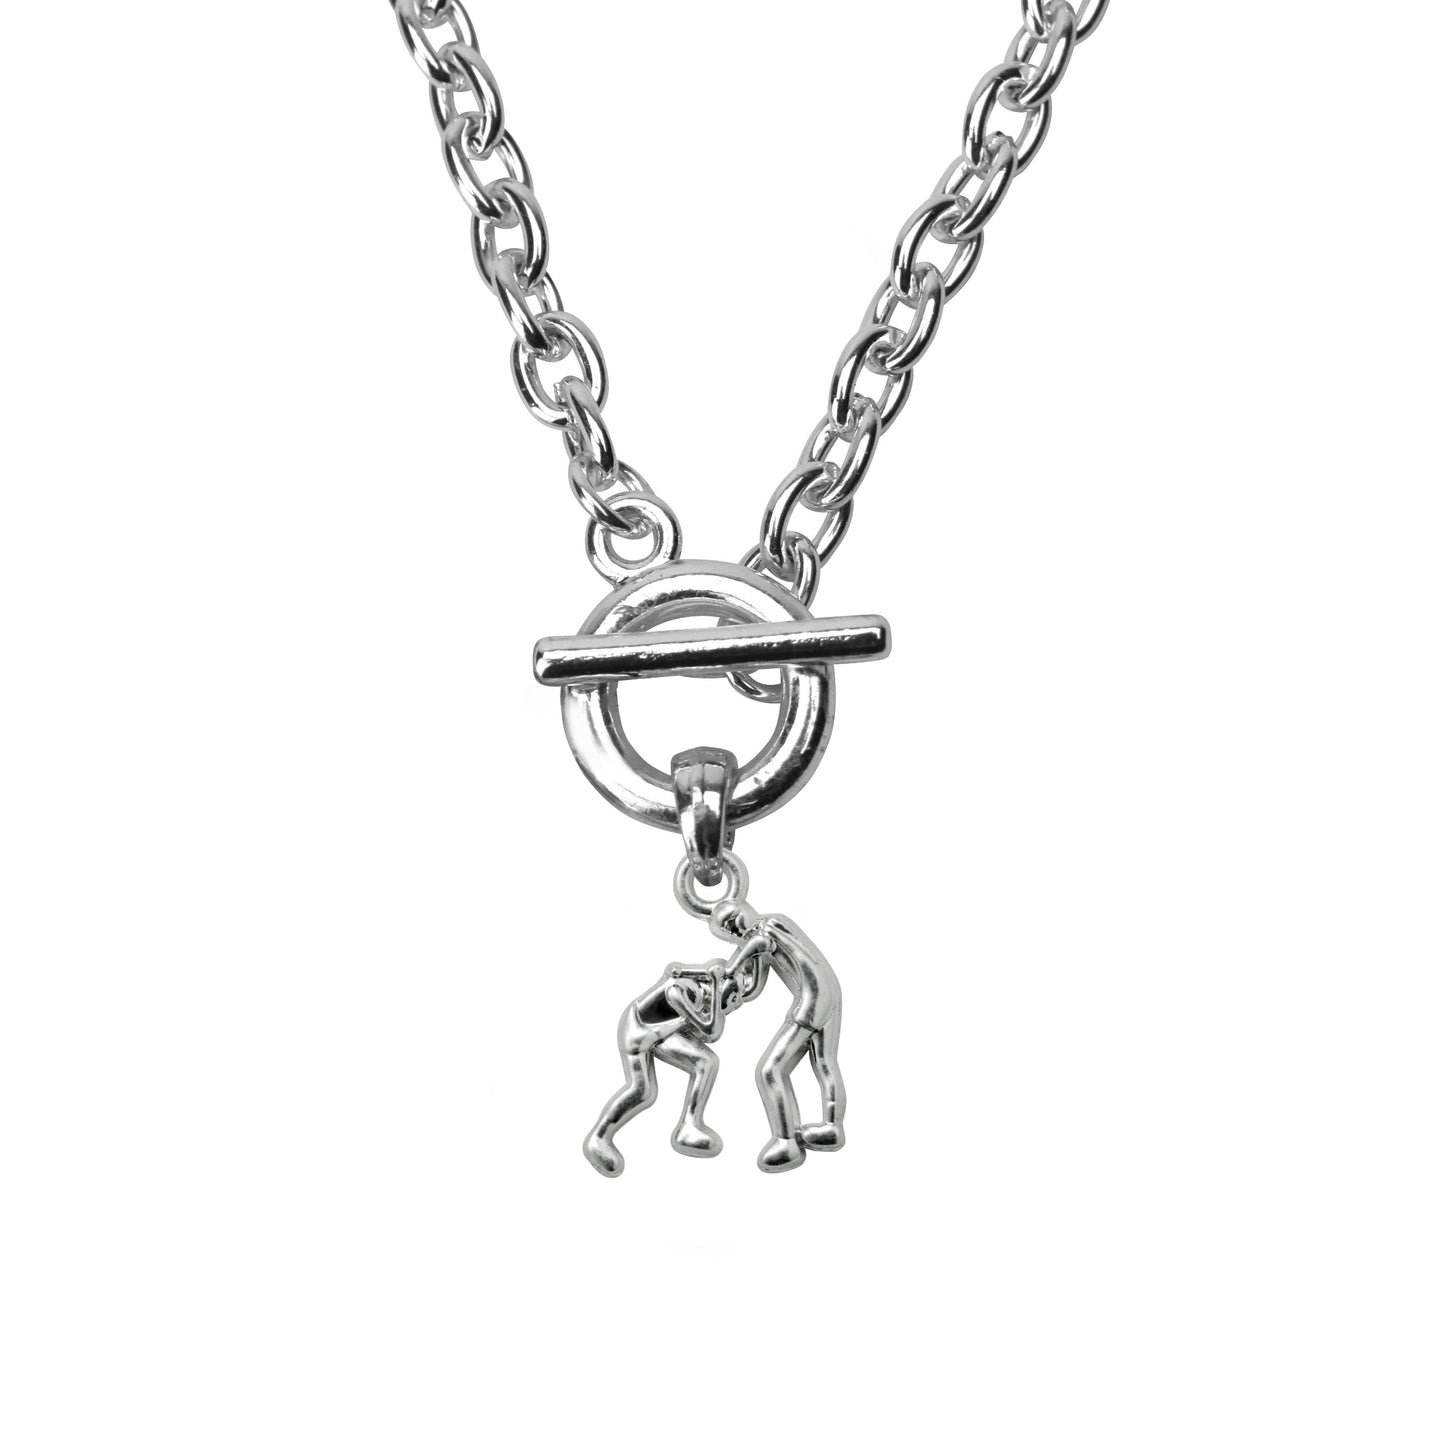 Silver Petite Wrestling Charm Toggle Necklace